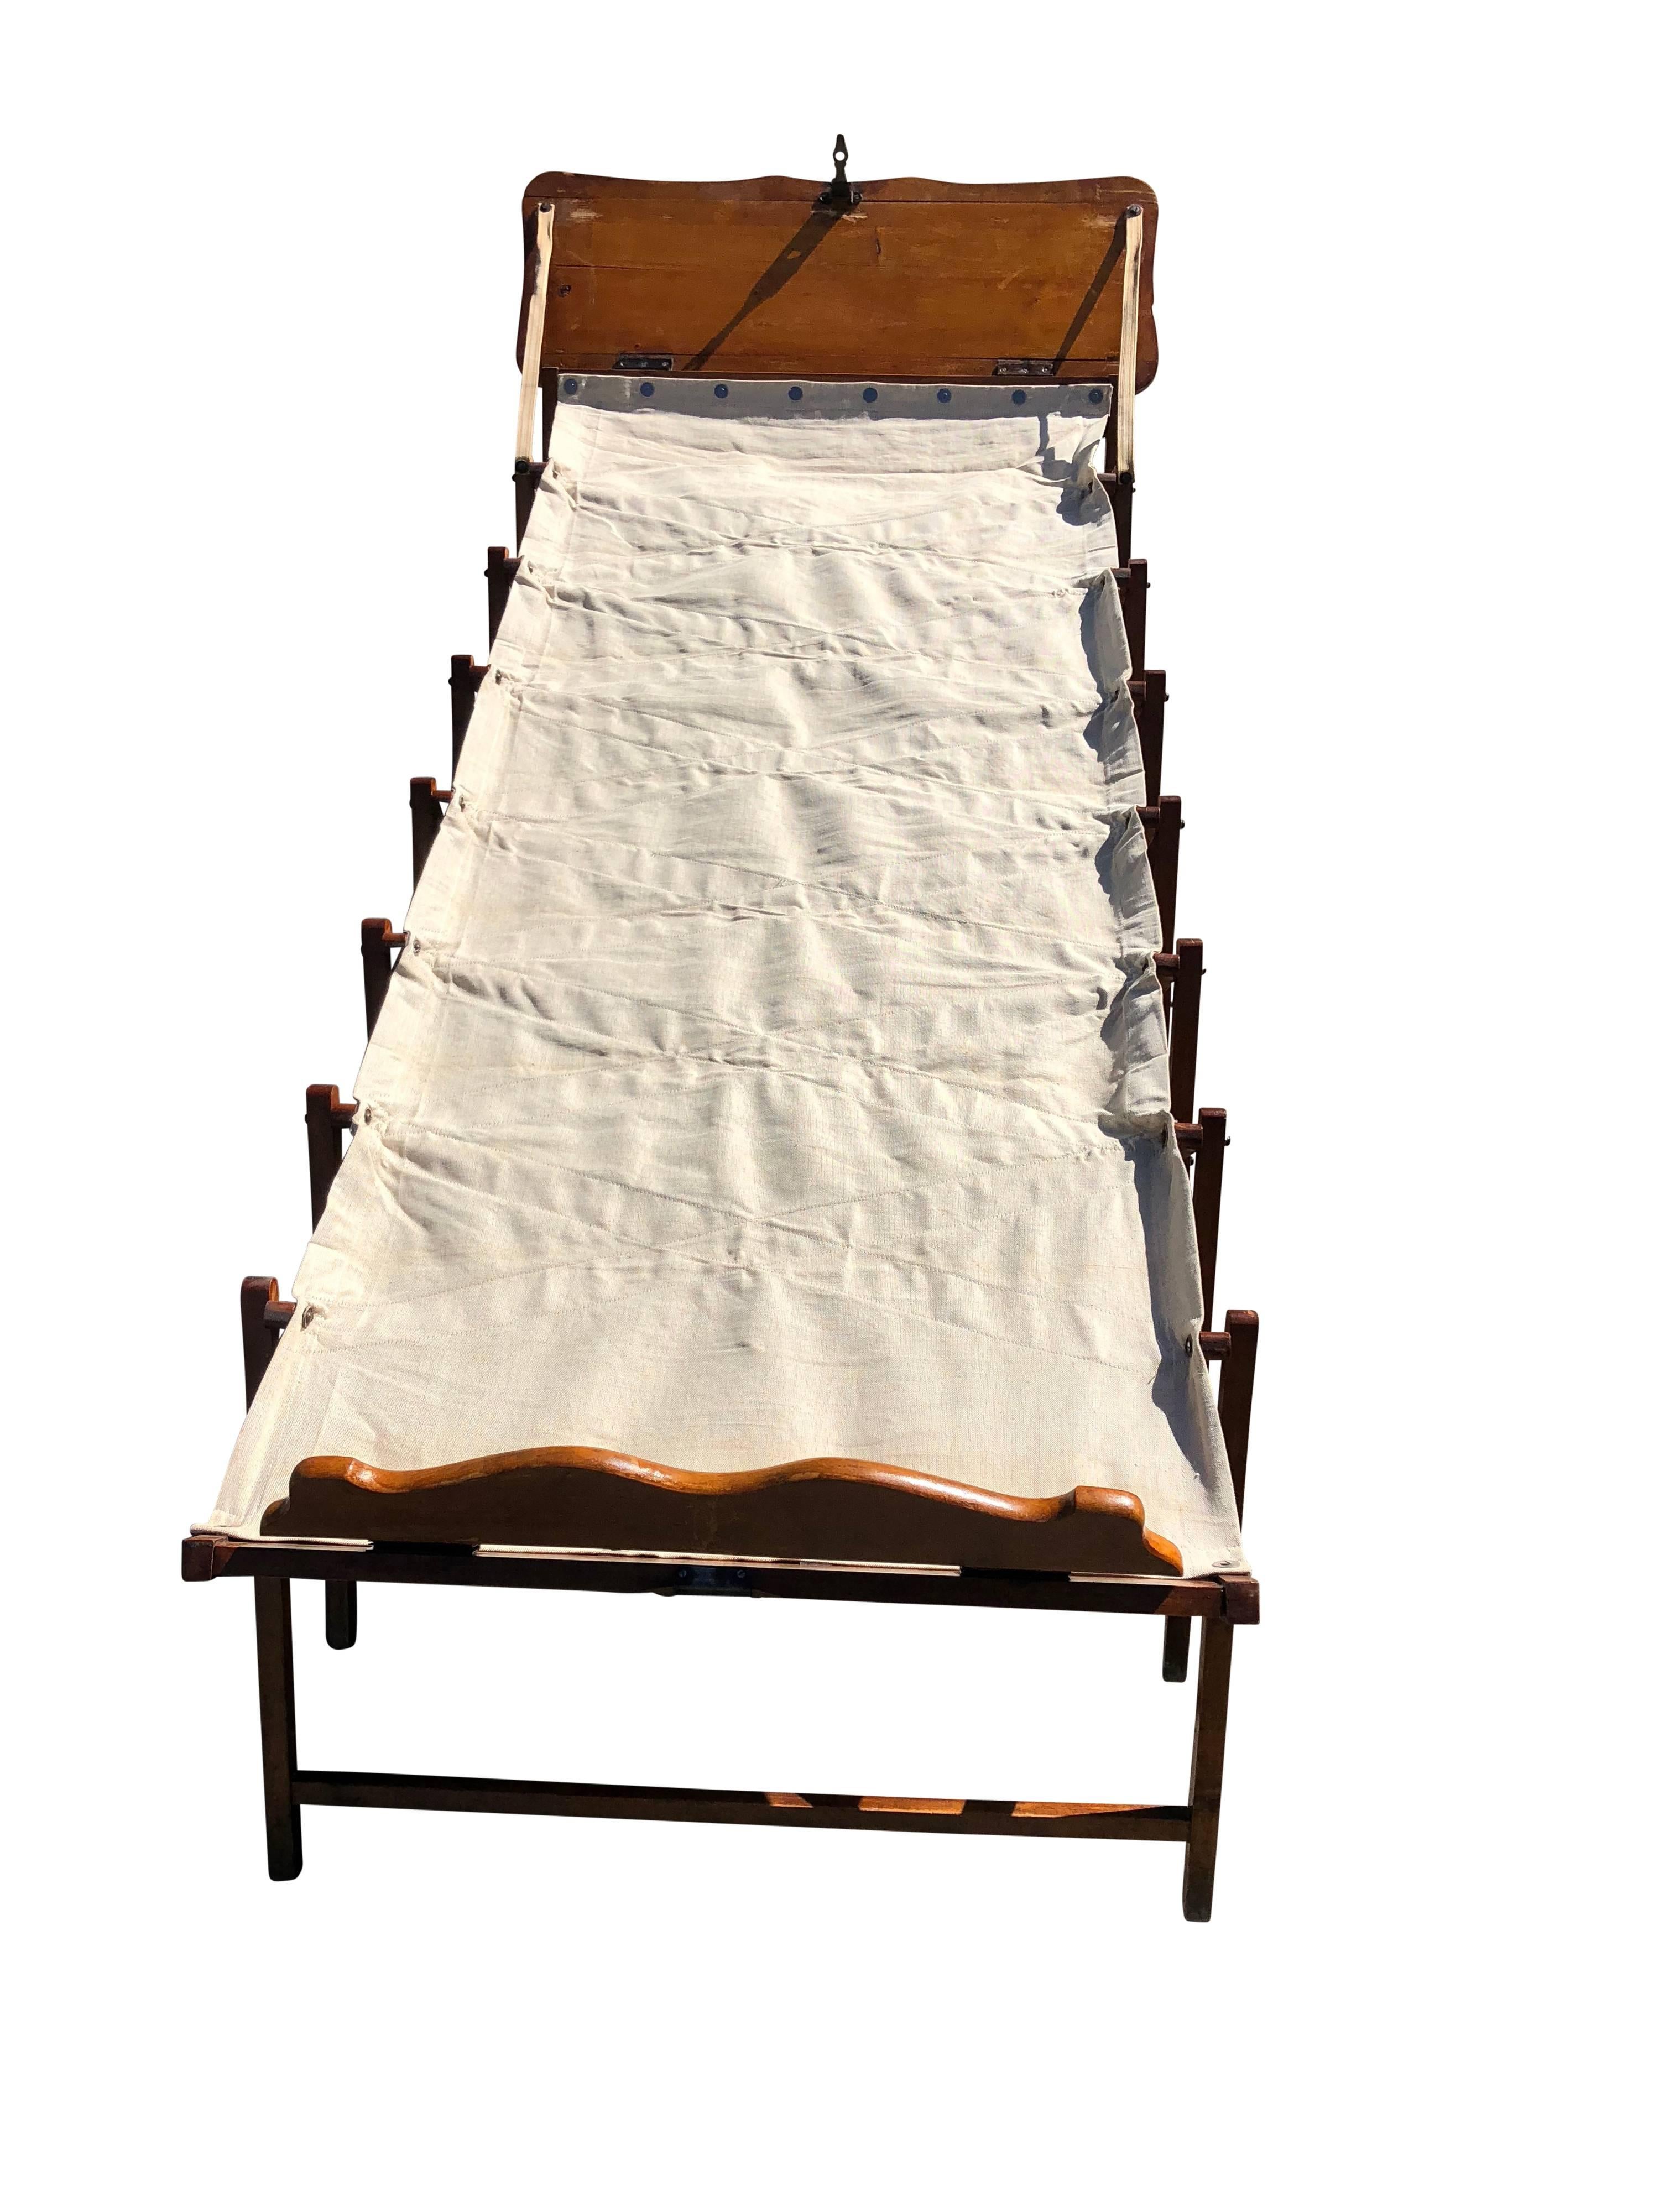 French First World War Officer's Collapsible Bed/Cot and Upholstered Bench, 1914 For Sale 3